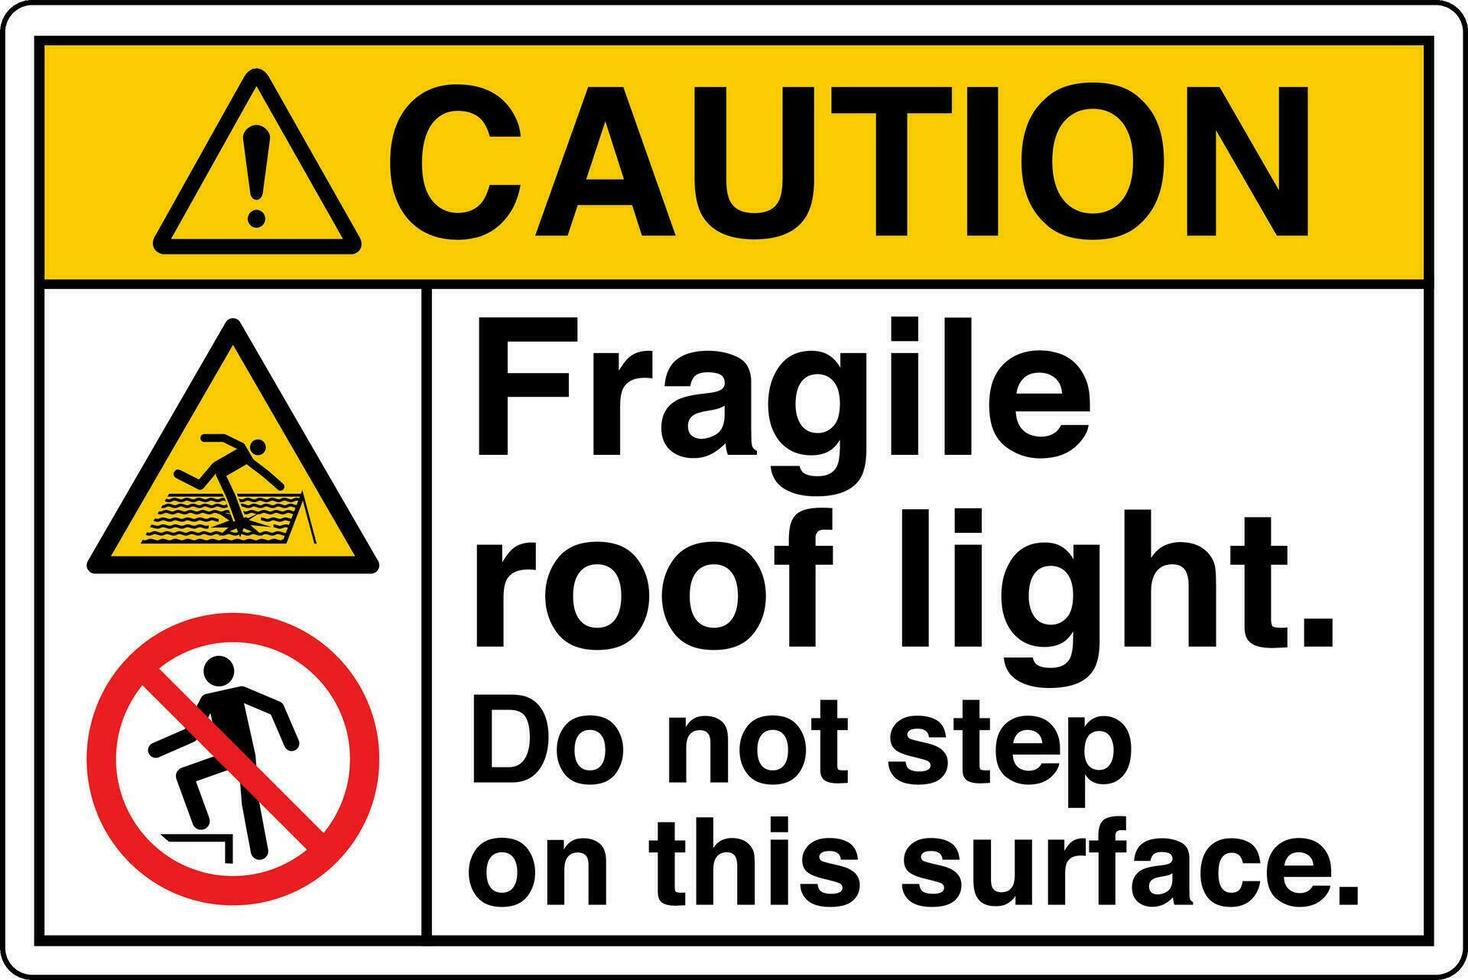 ANSI Z535 Safety Sign Marking Label Symbol Pictogram Standards Caution Fragile roof light do not step on this surface with text landscape multi icon white vector